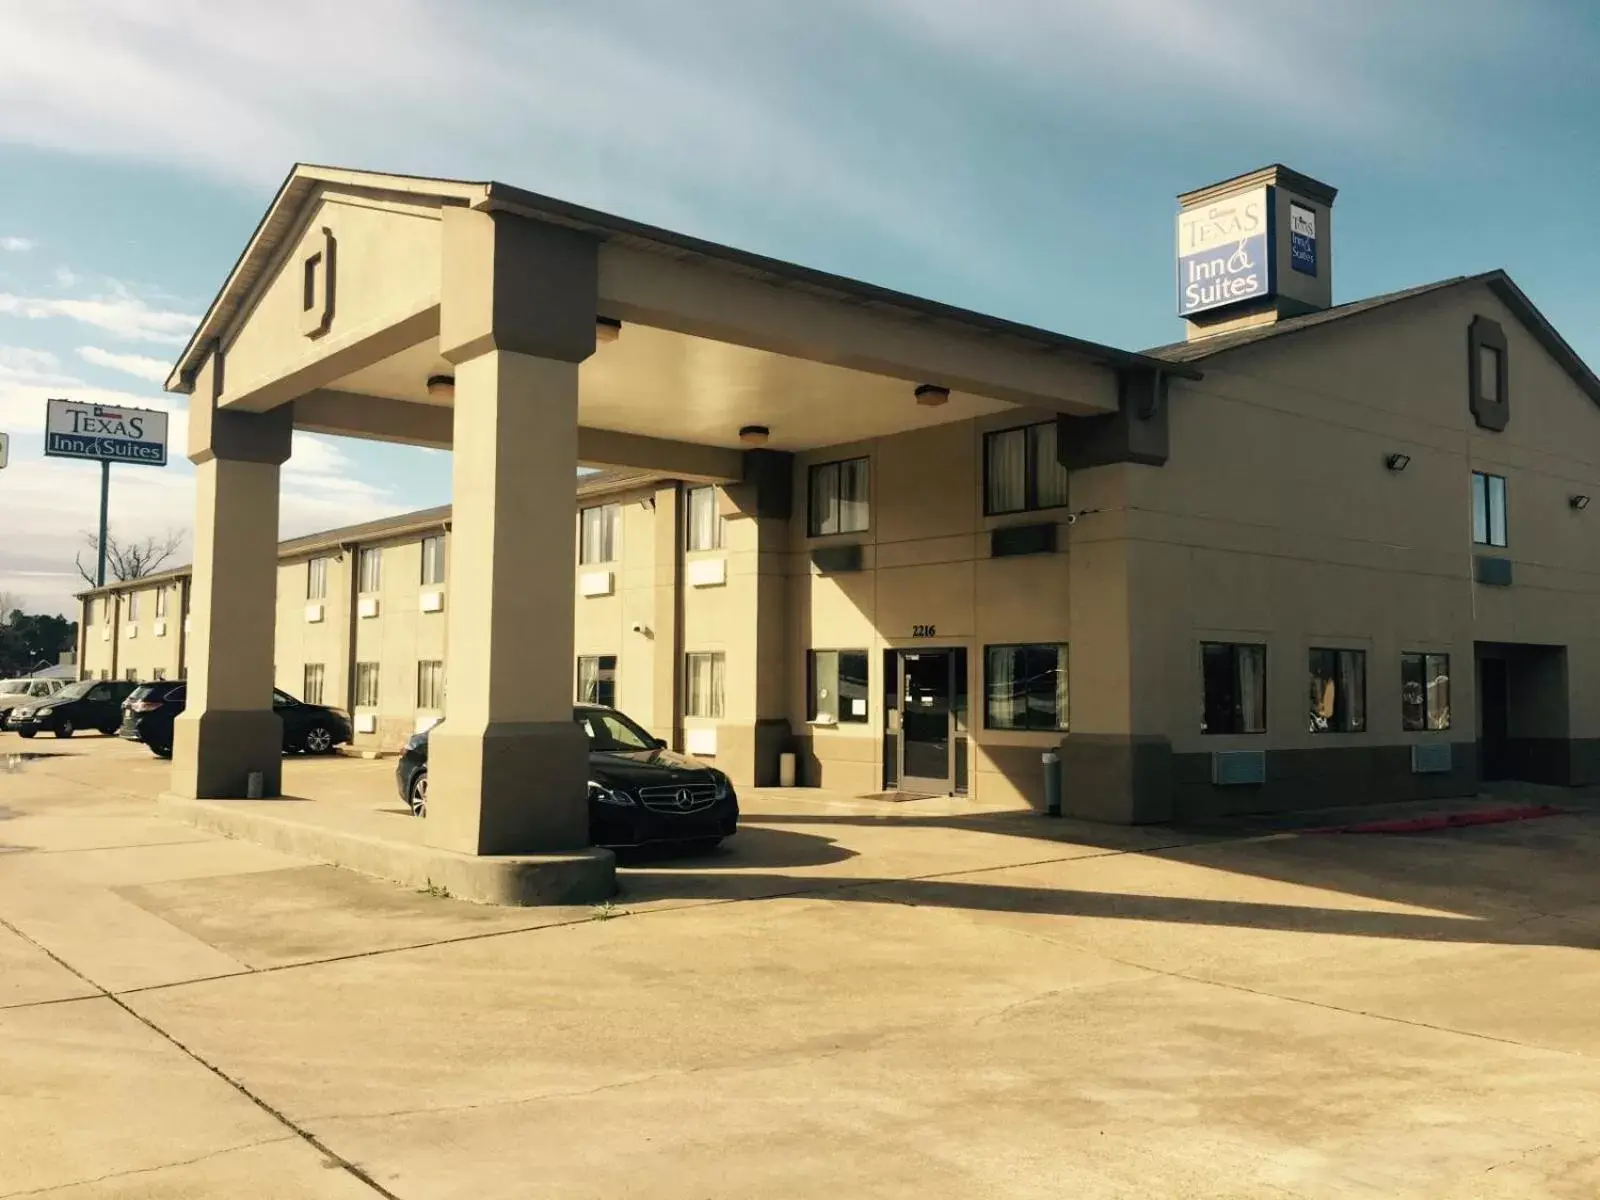 Property Building in Texas Inn and Suites Lufkin